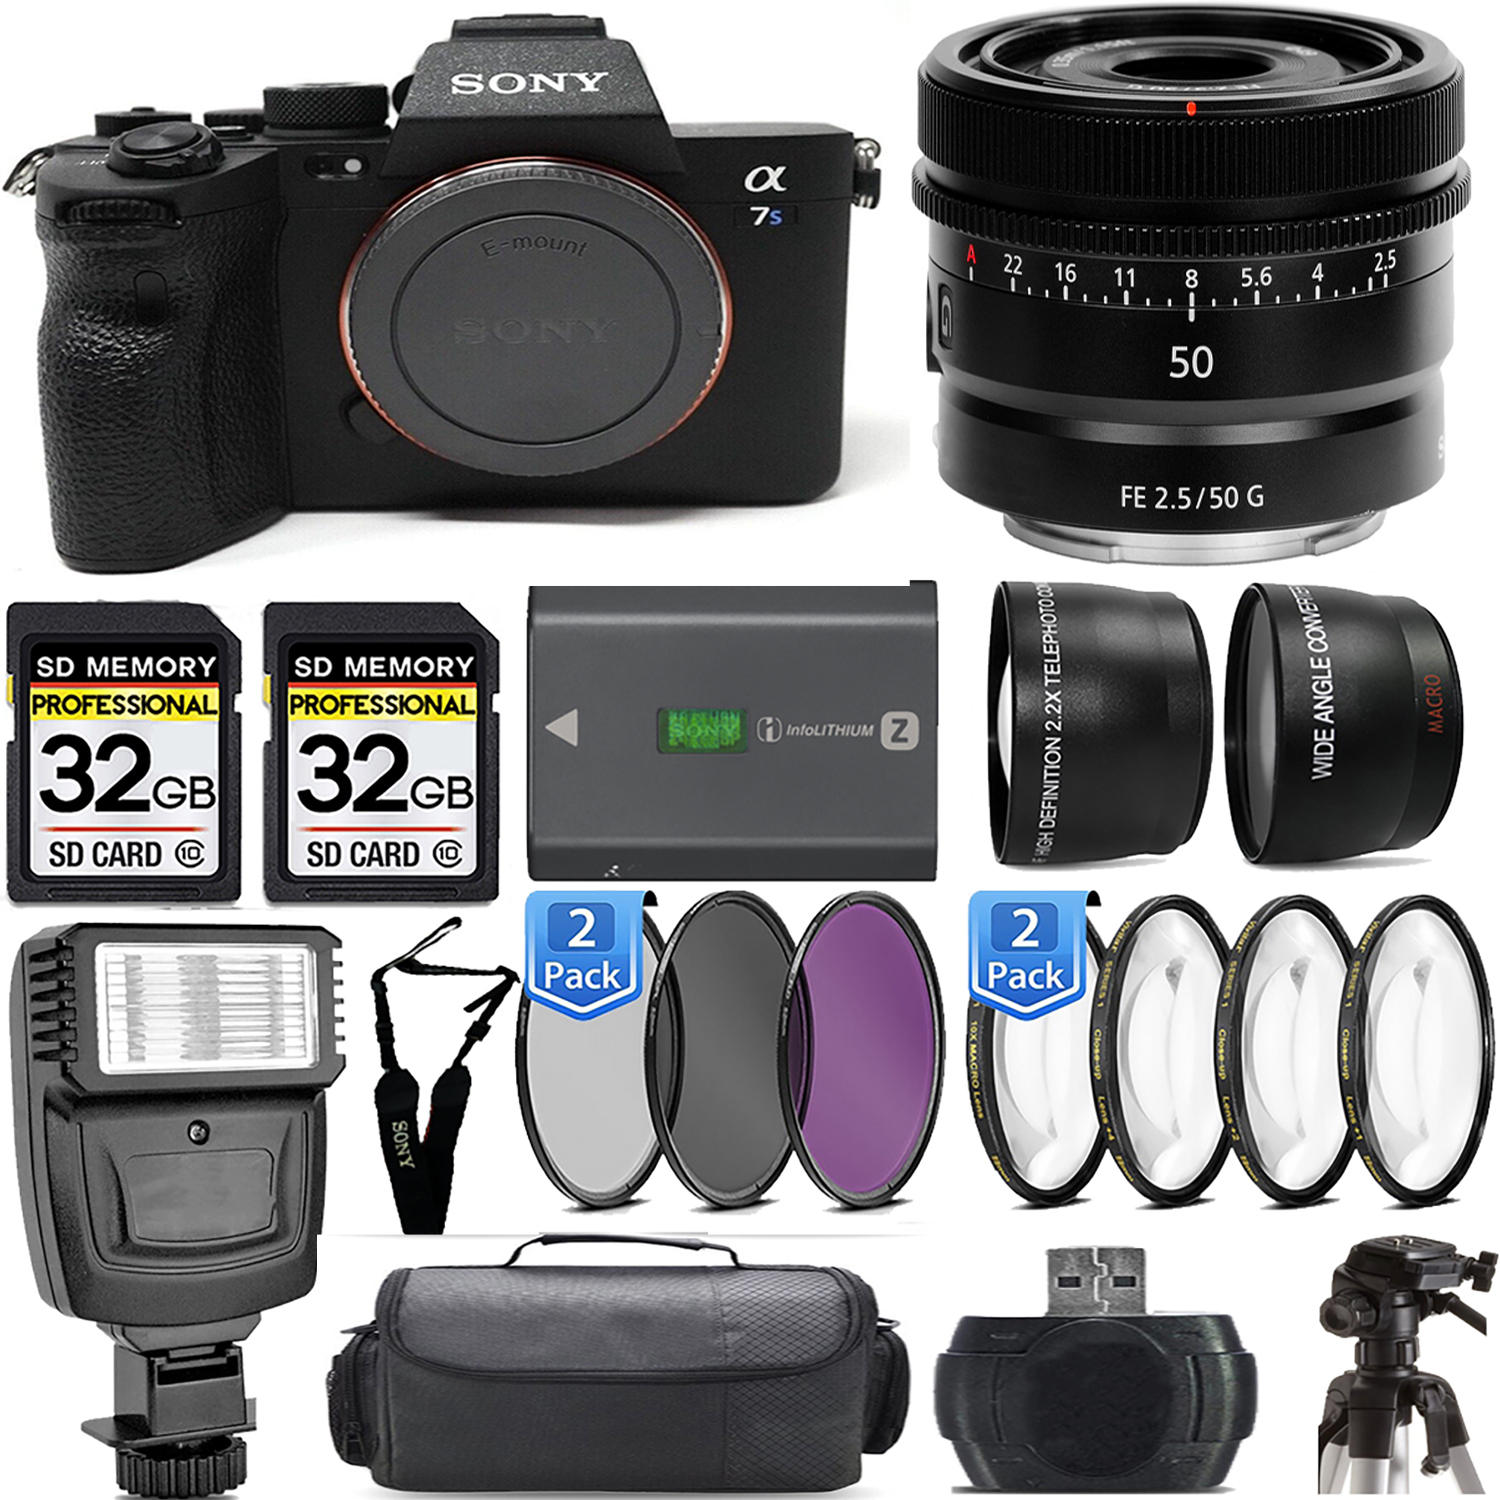 a7S III Mirrorless Camera + 50mm Lens + Flash + Extra Battery - Kit *FREE SHIPPING*